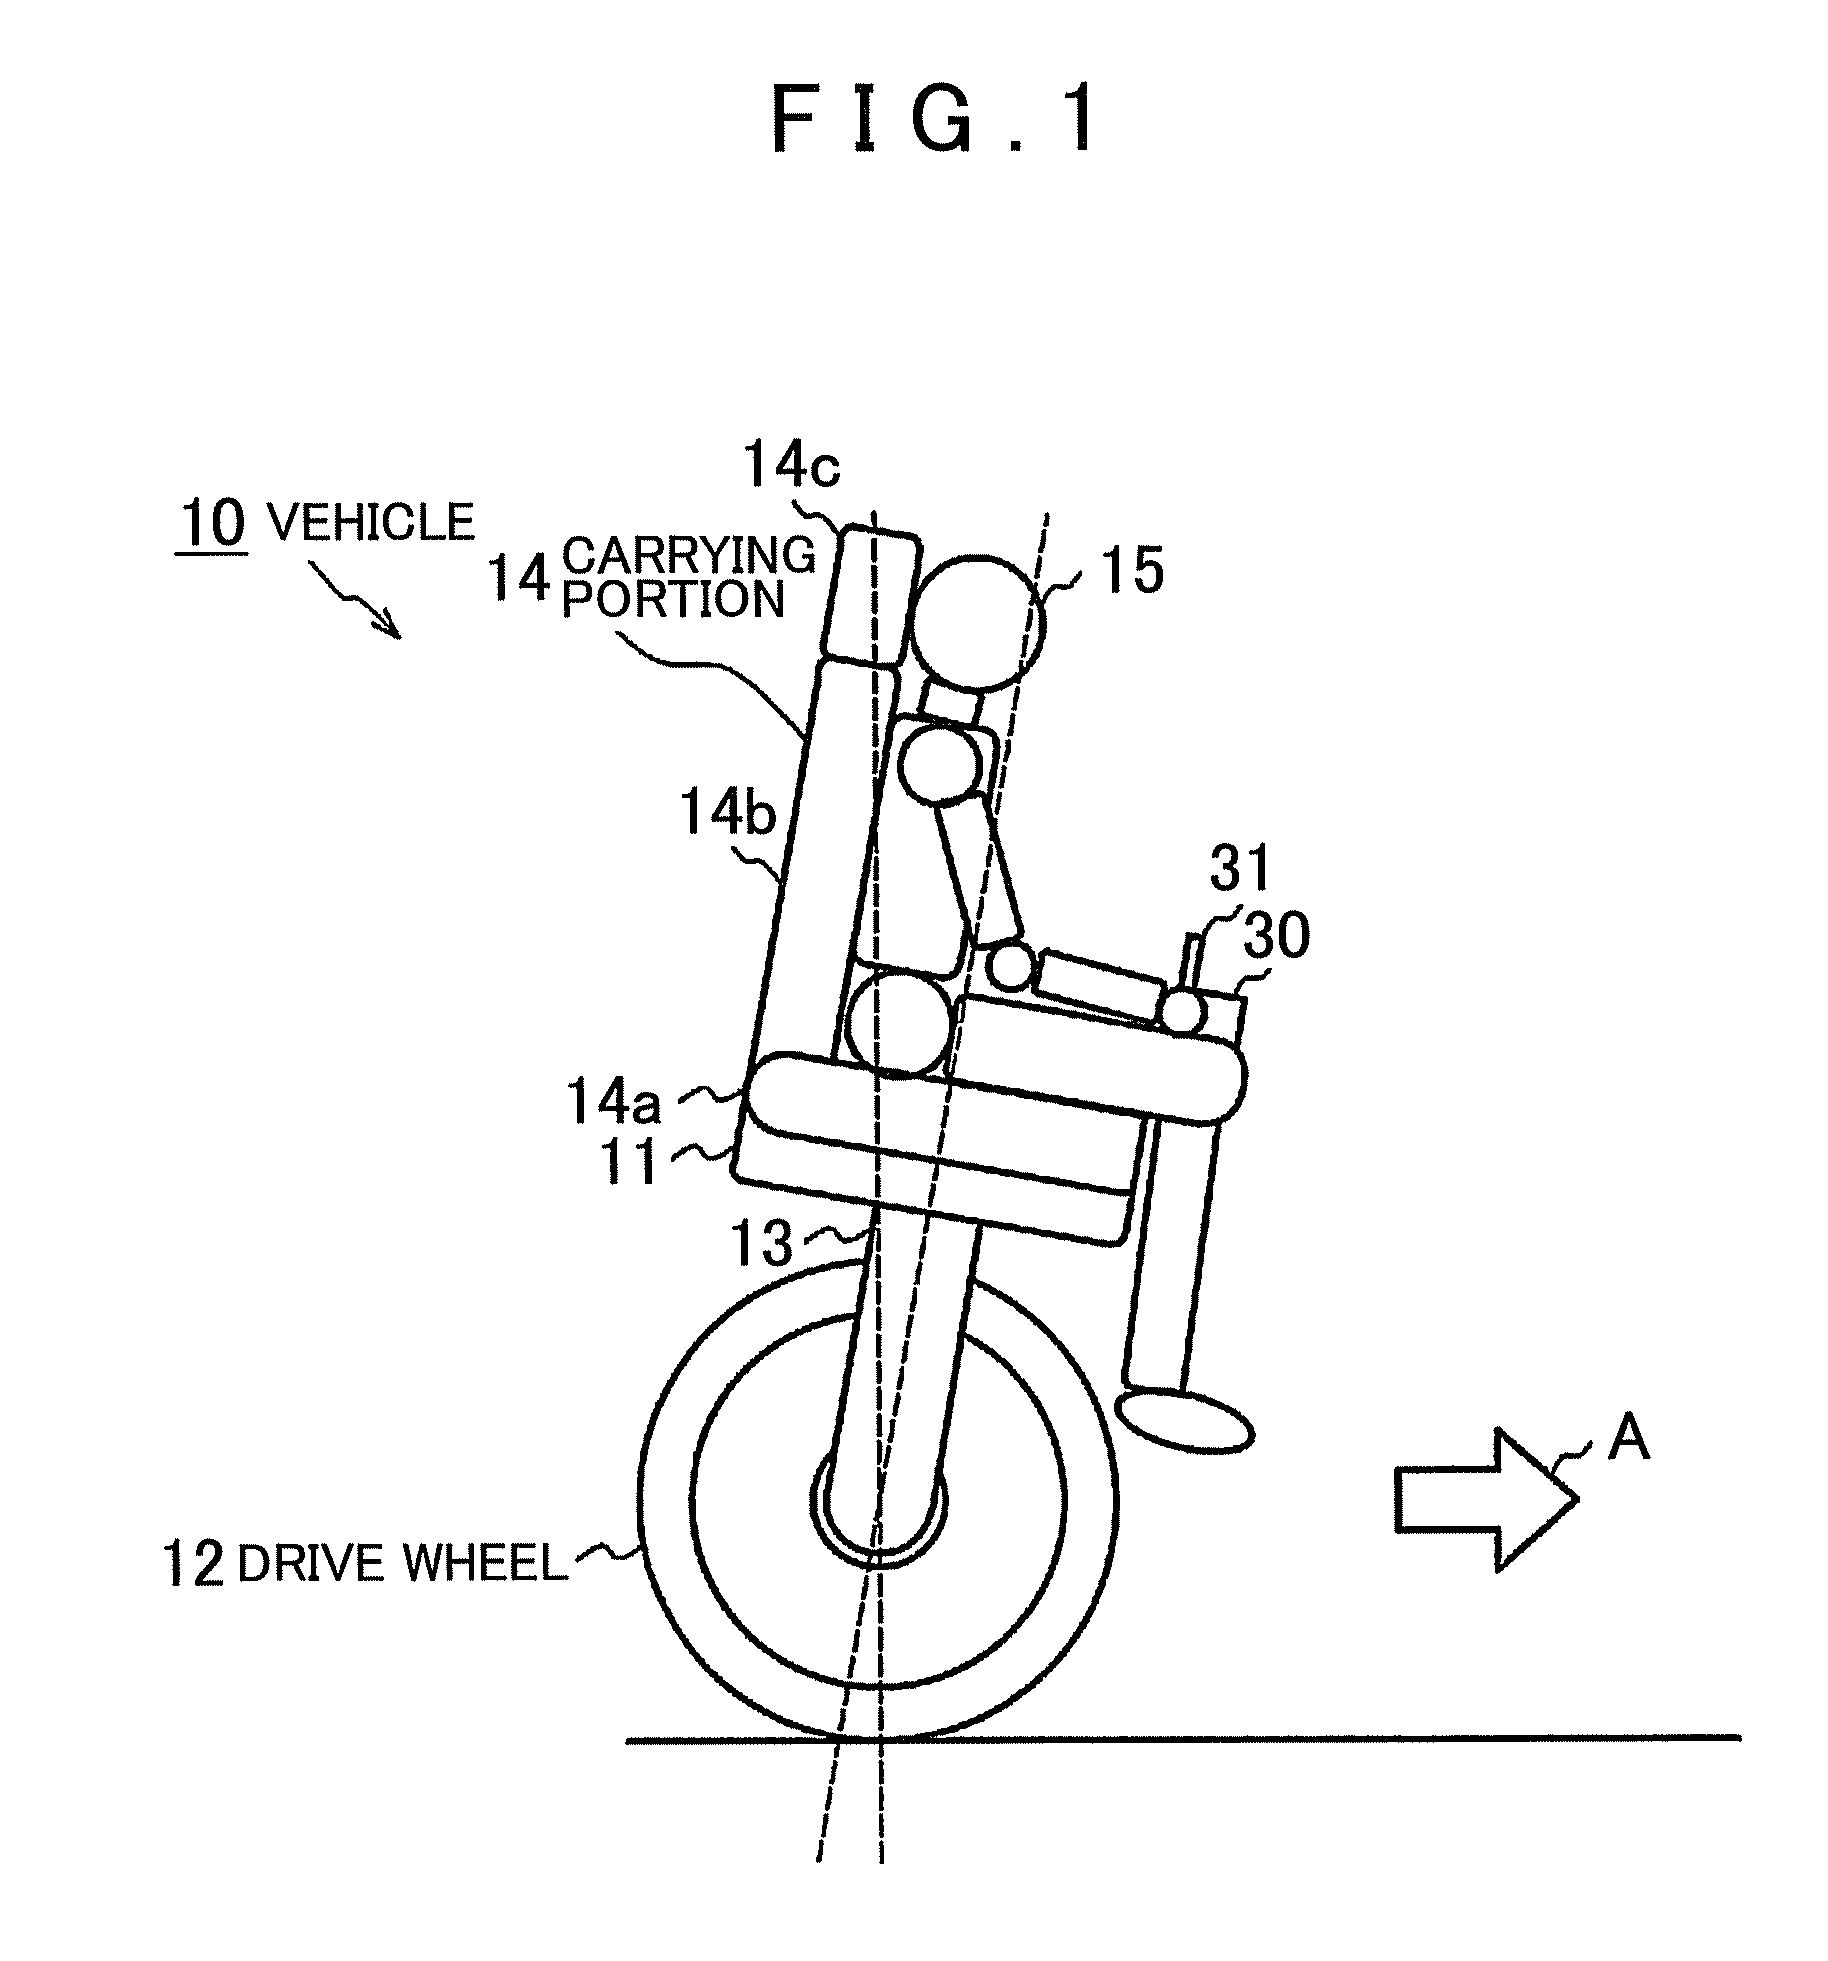 Inverted pendulum vehicle with stability on a slope